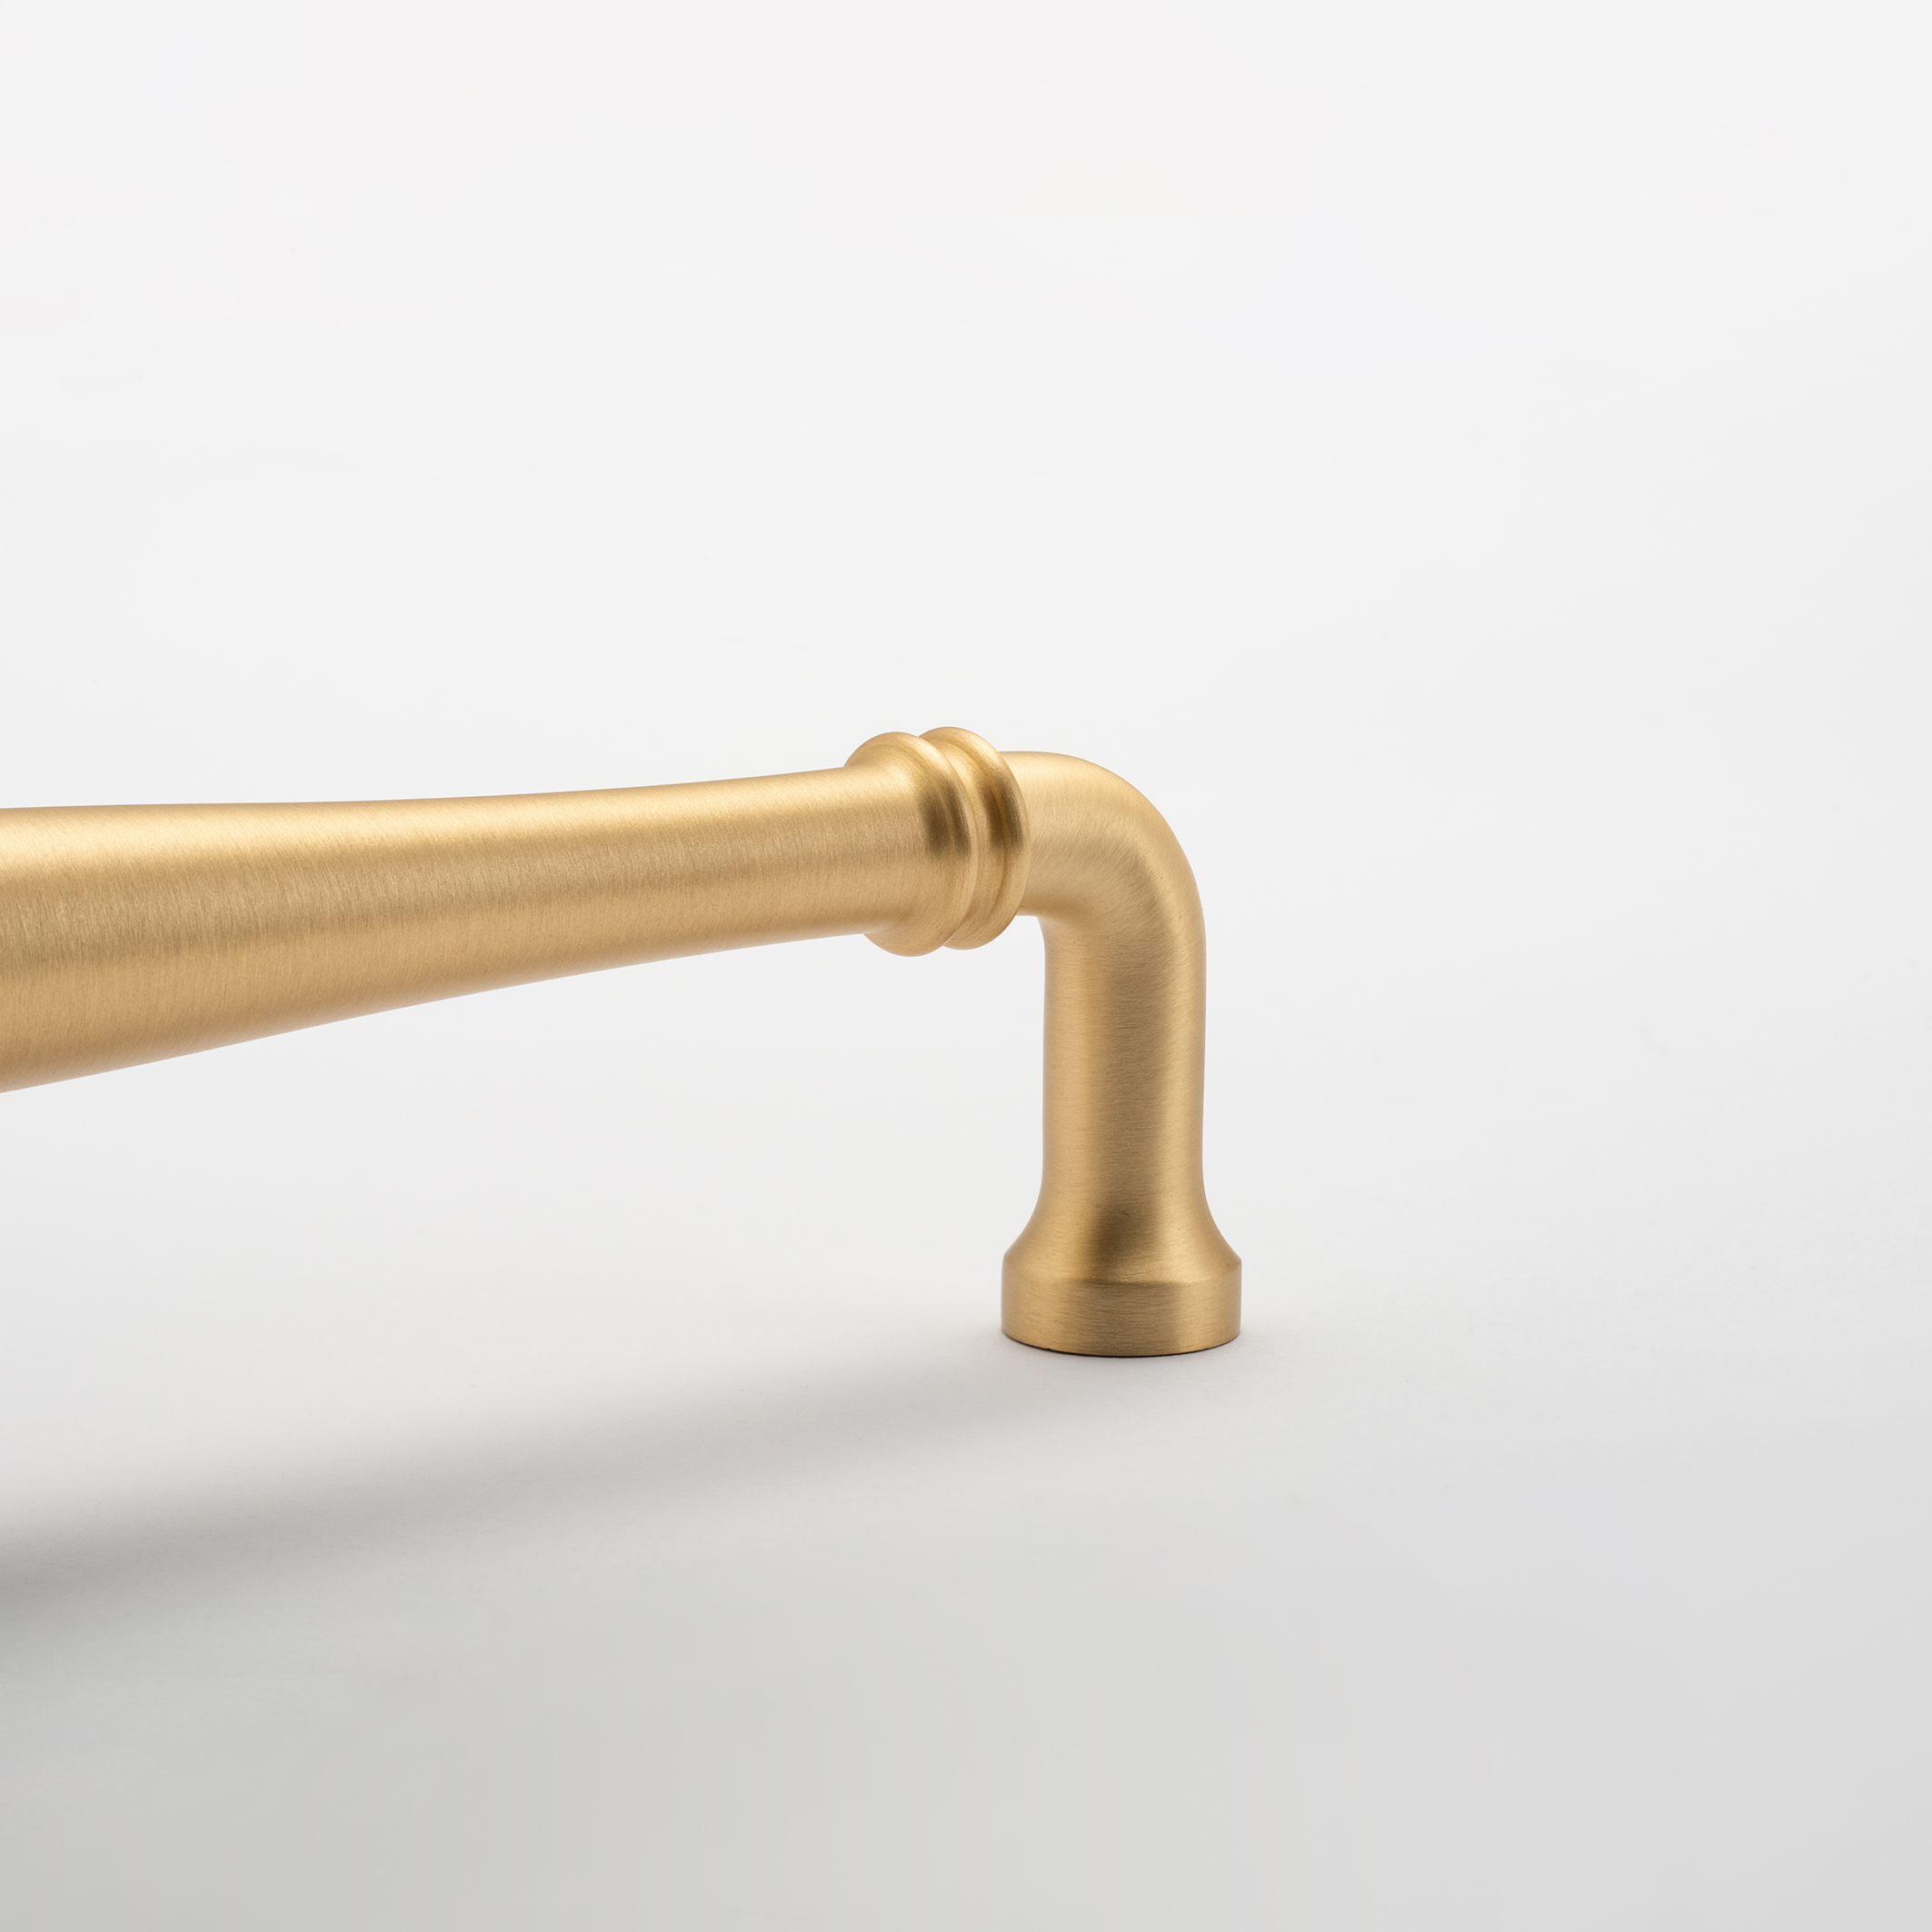 21096B - Sarlat Cabinet Pull with Backplate - CTC320mm - Brushed Brass